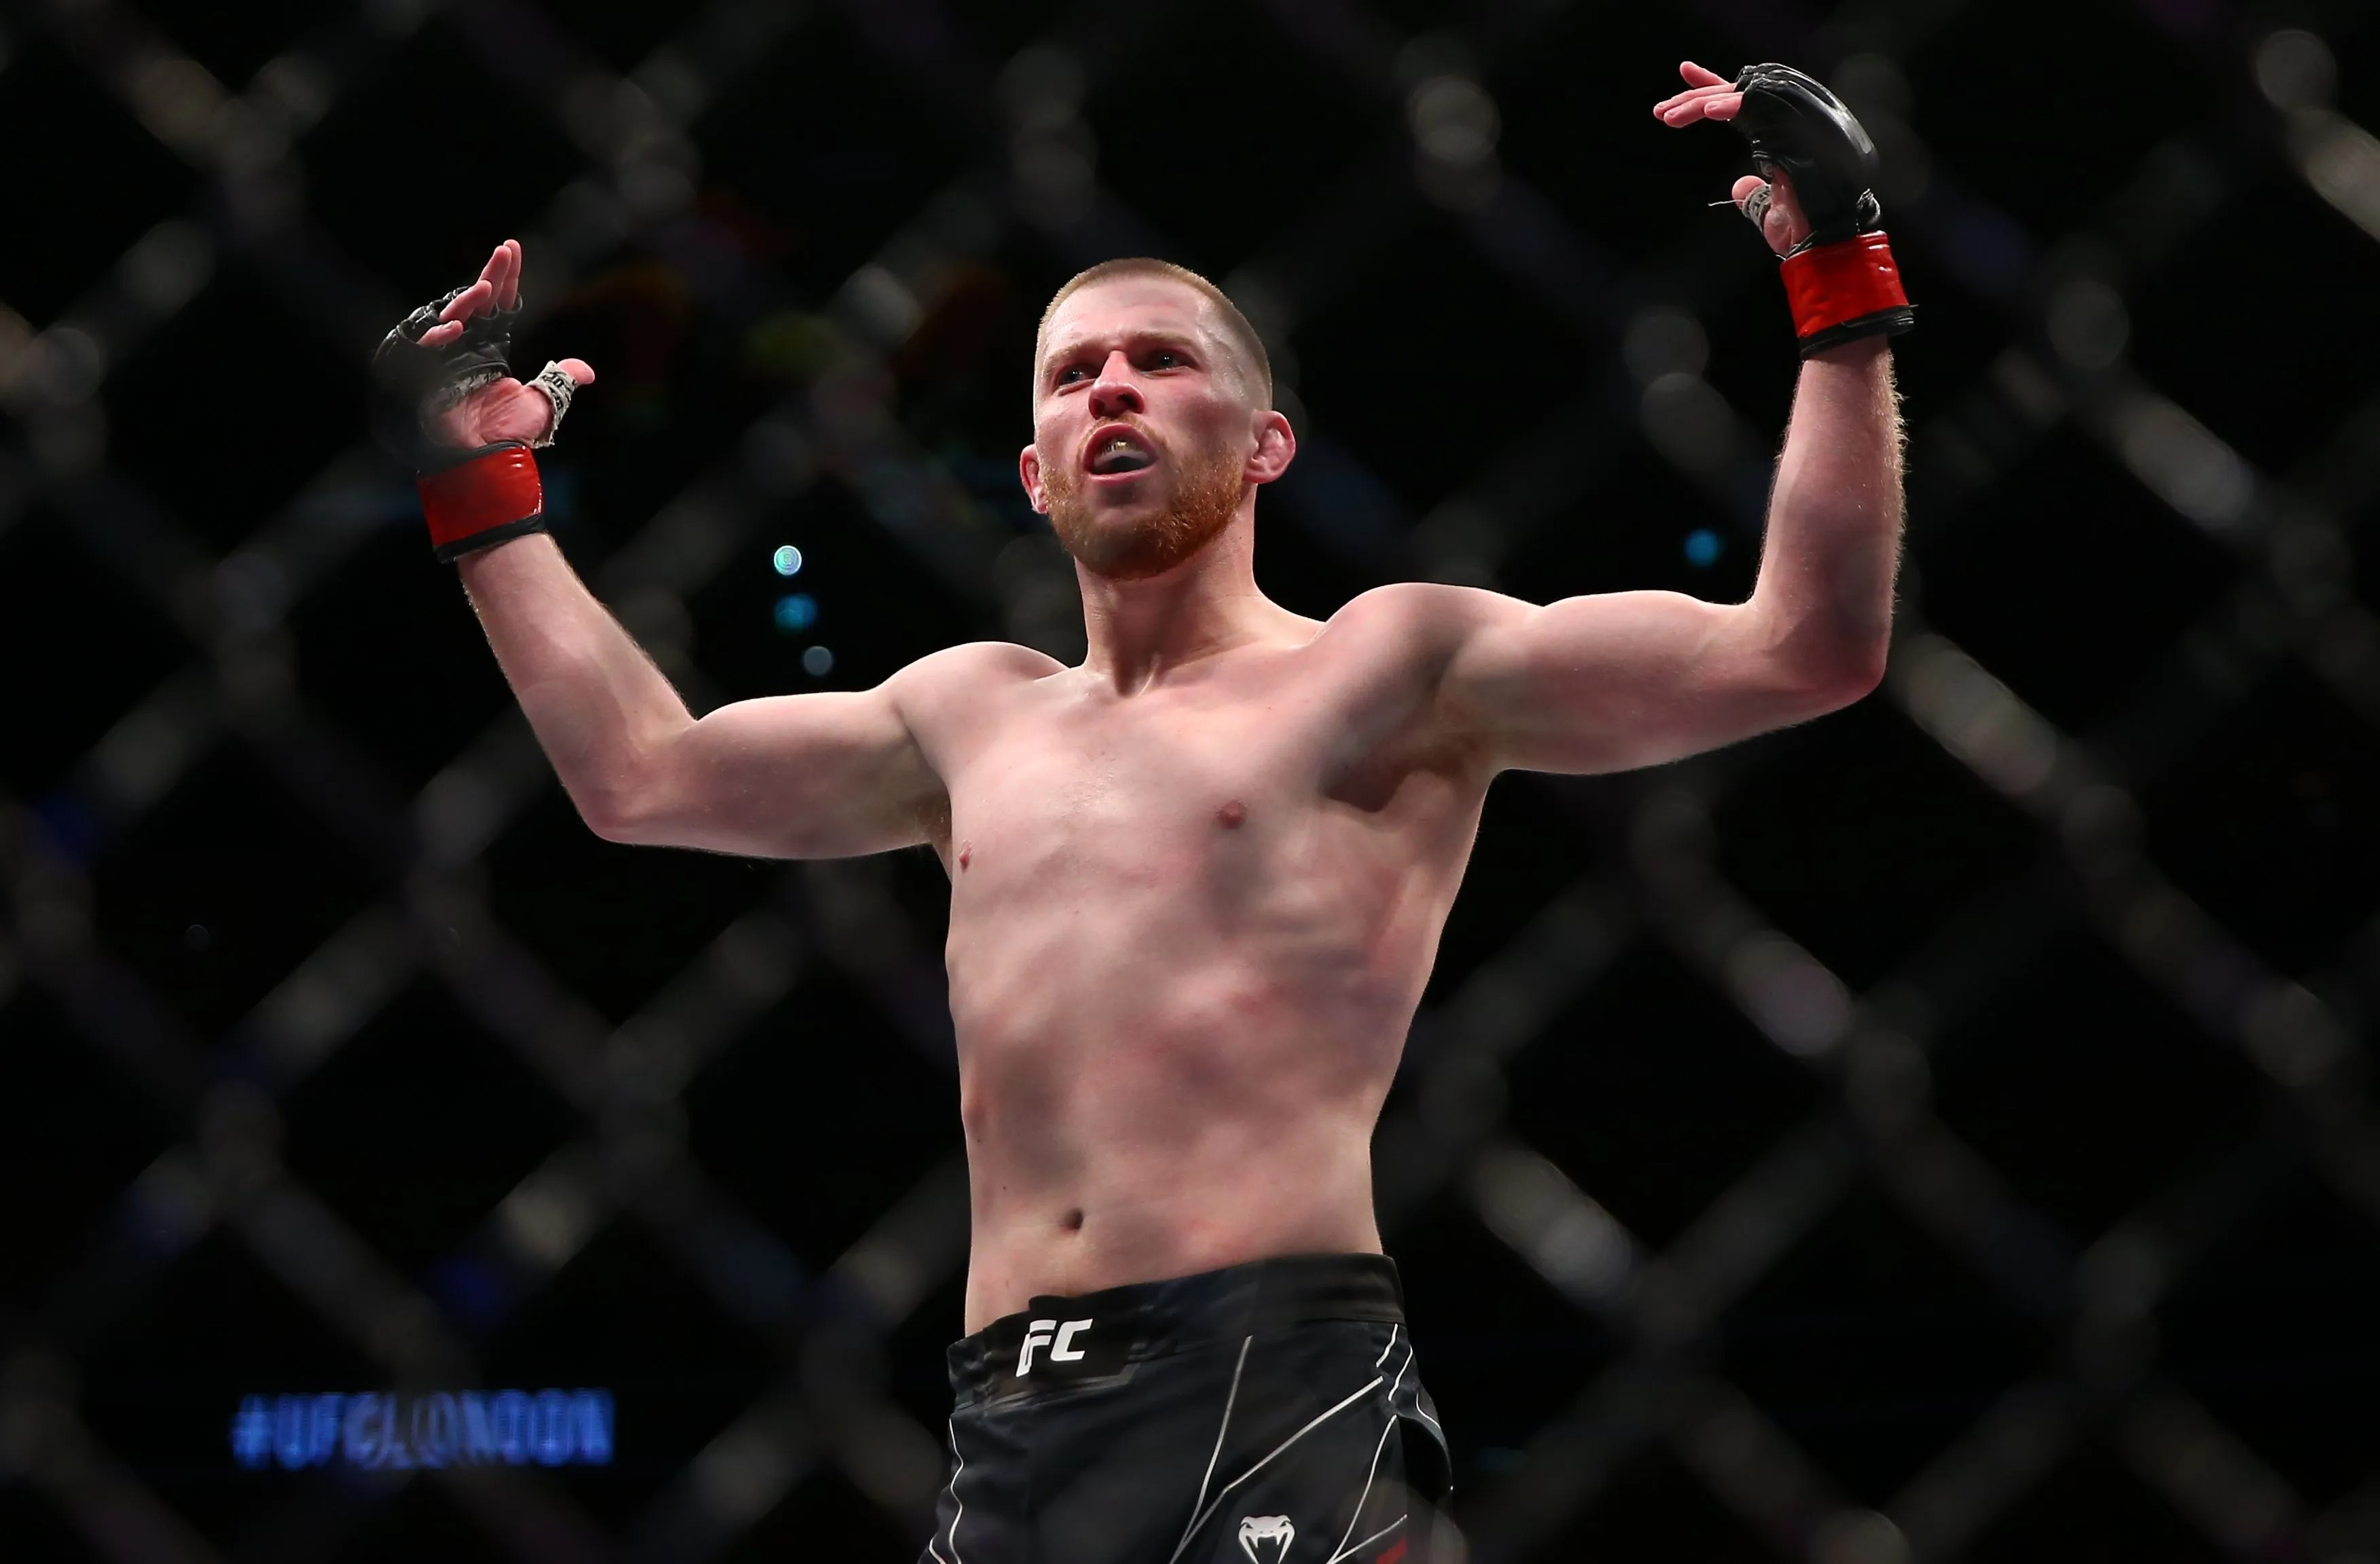 My motivation couldn't be any higher after birth of my son, says UFC's Shore